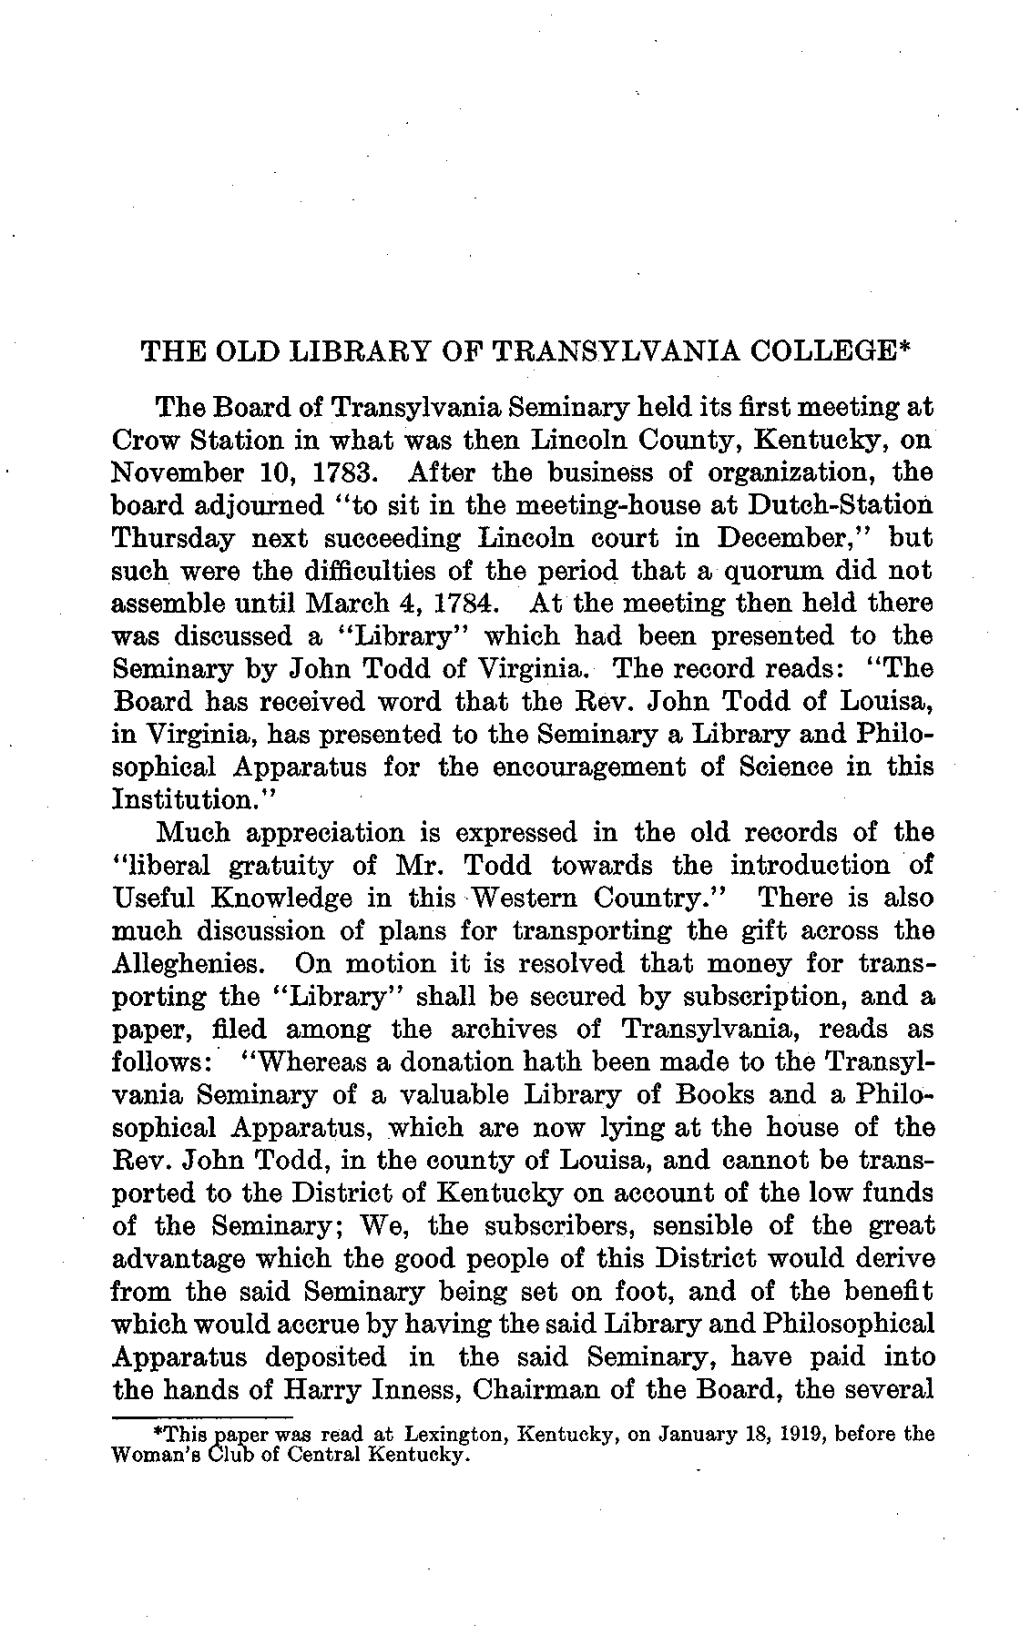 The Old Library of Transylvania College*